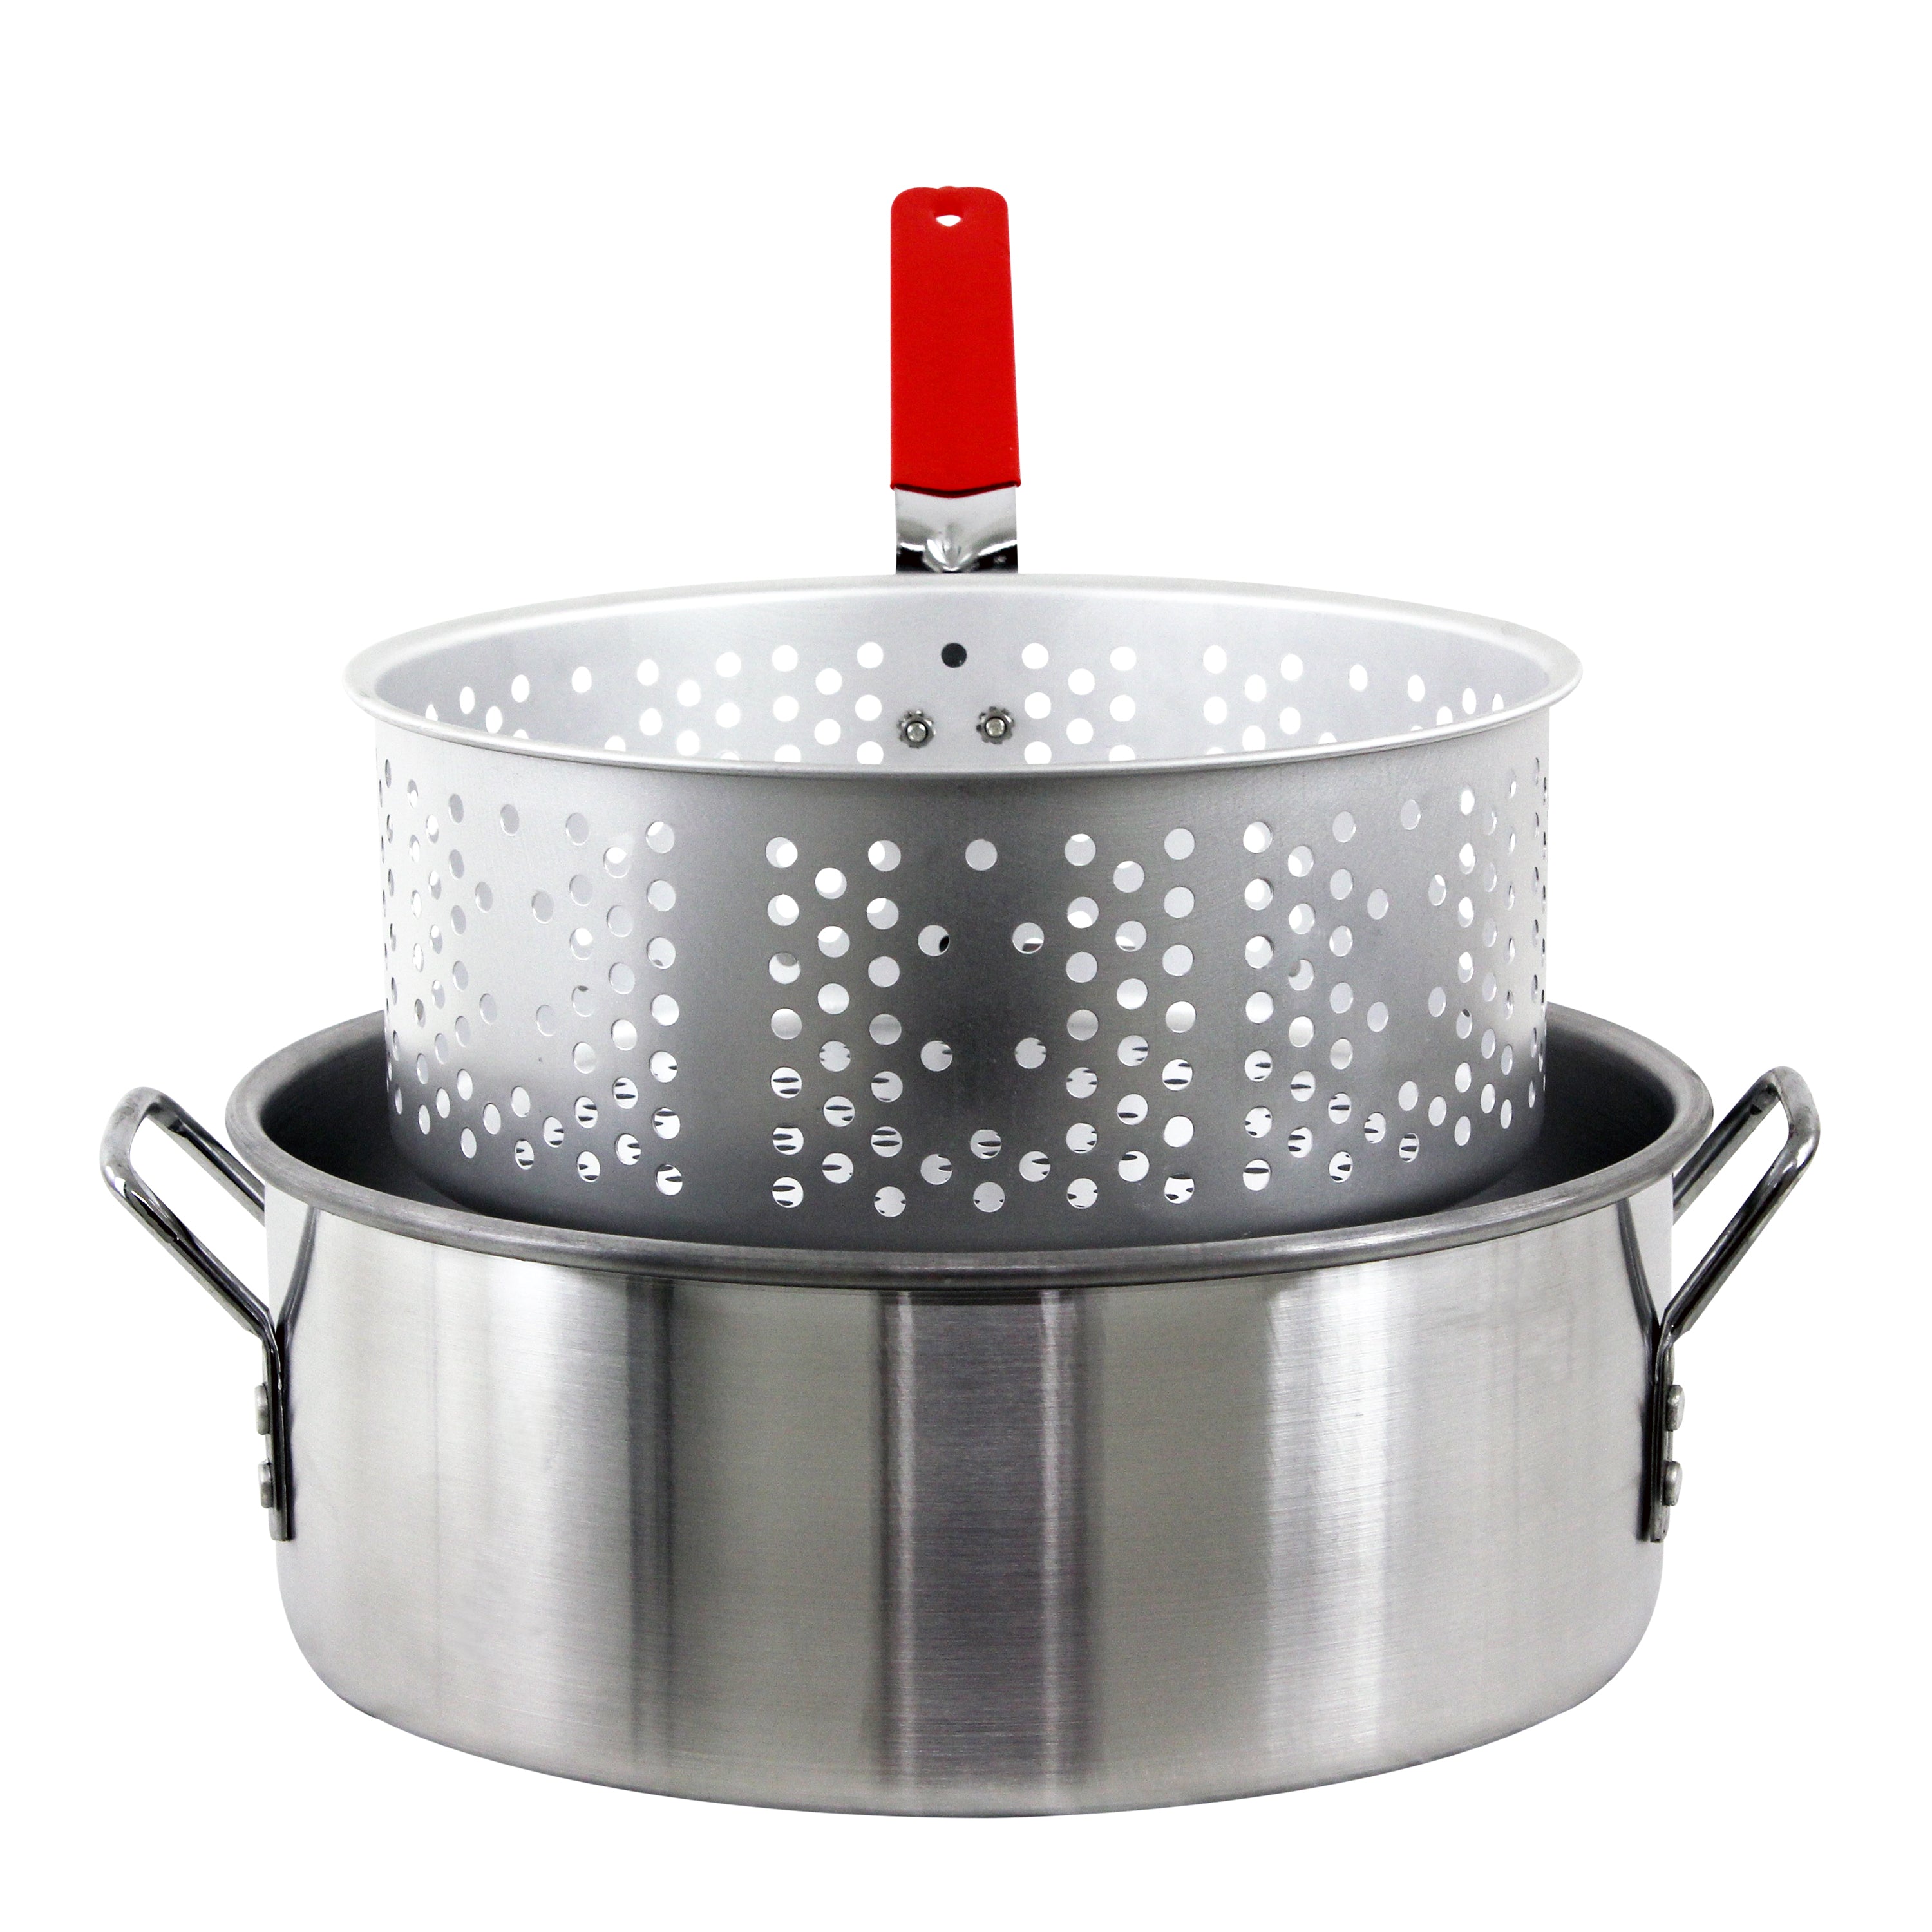 CHARD ASP42 Aluminum Stock Pot and Perforated Strainer Basket Set